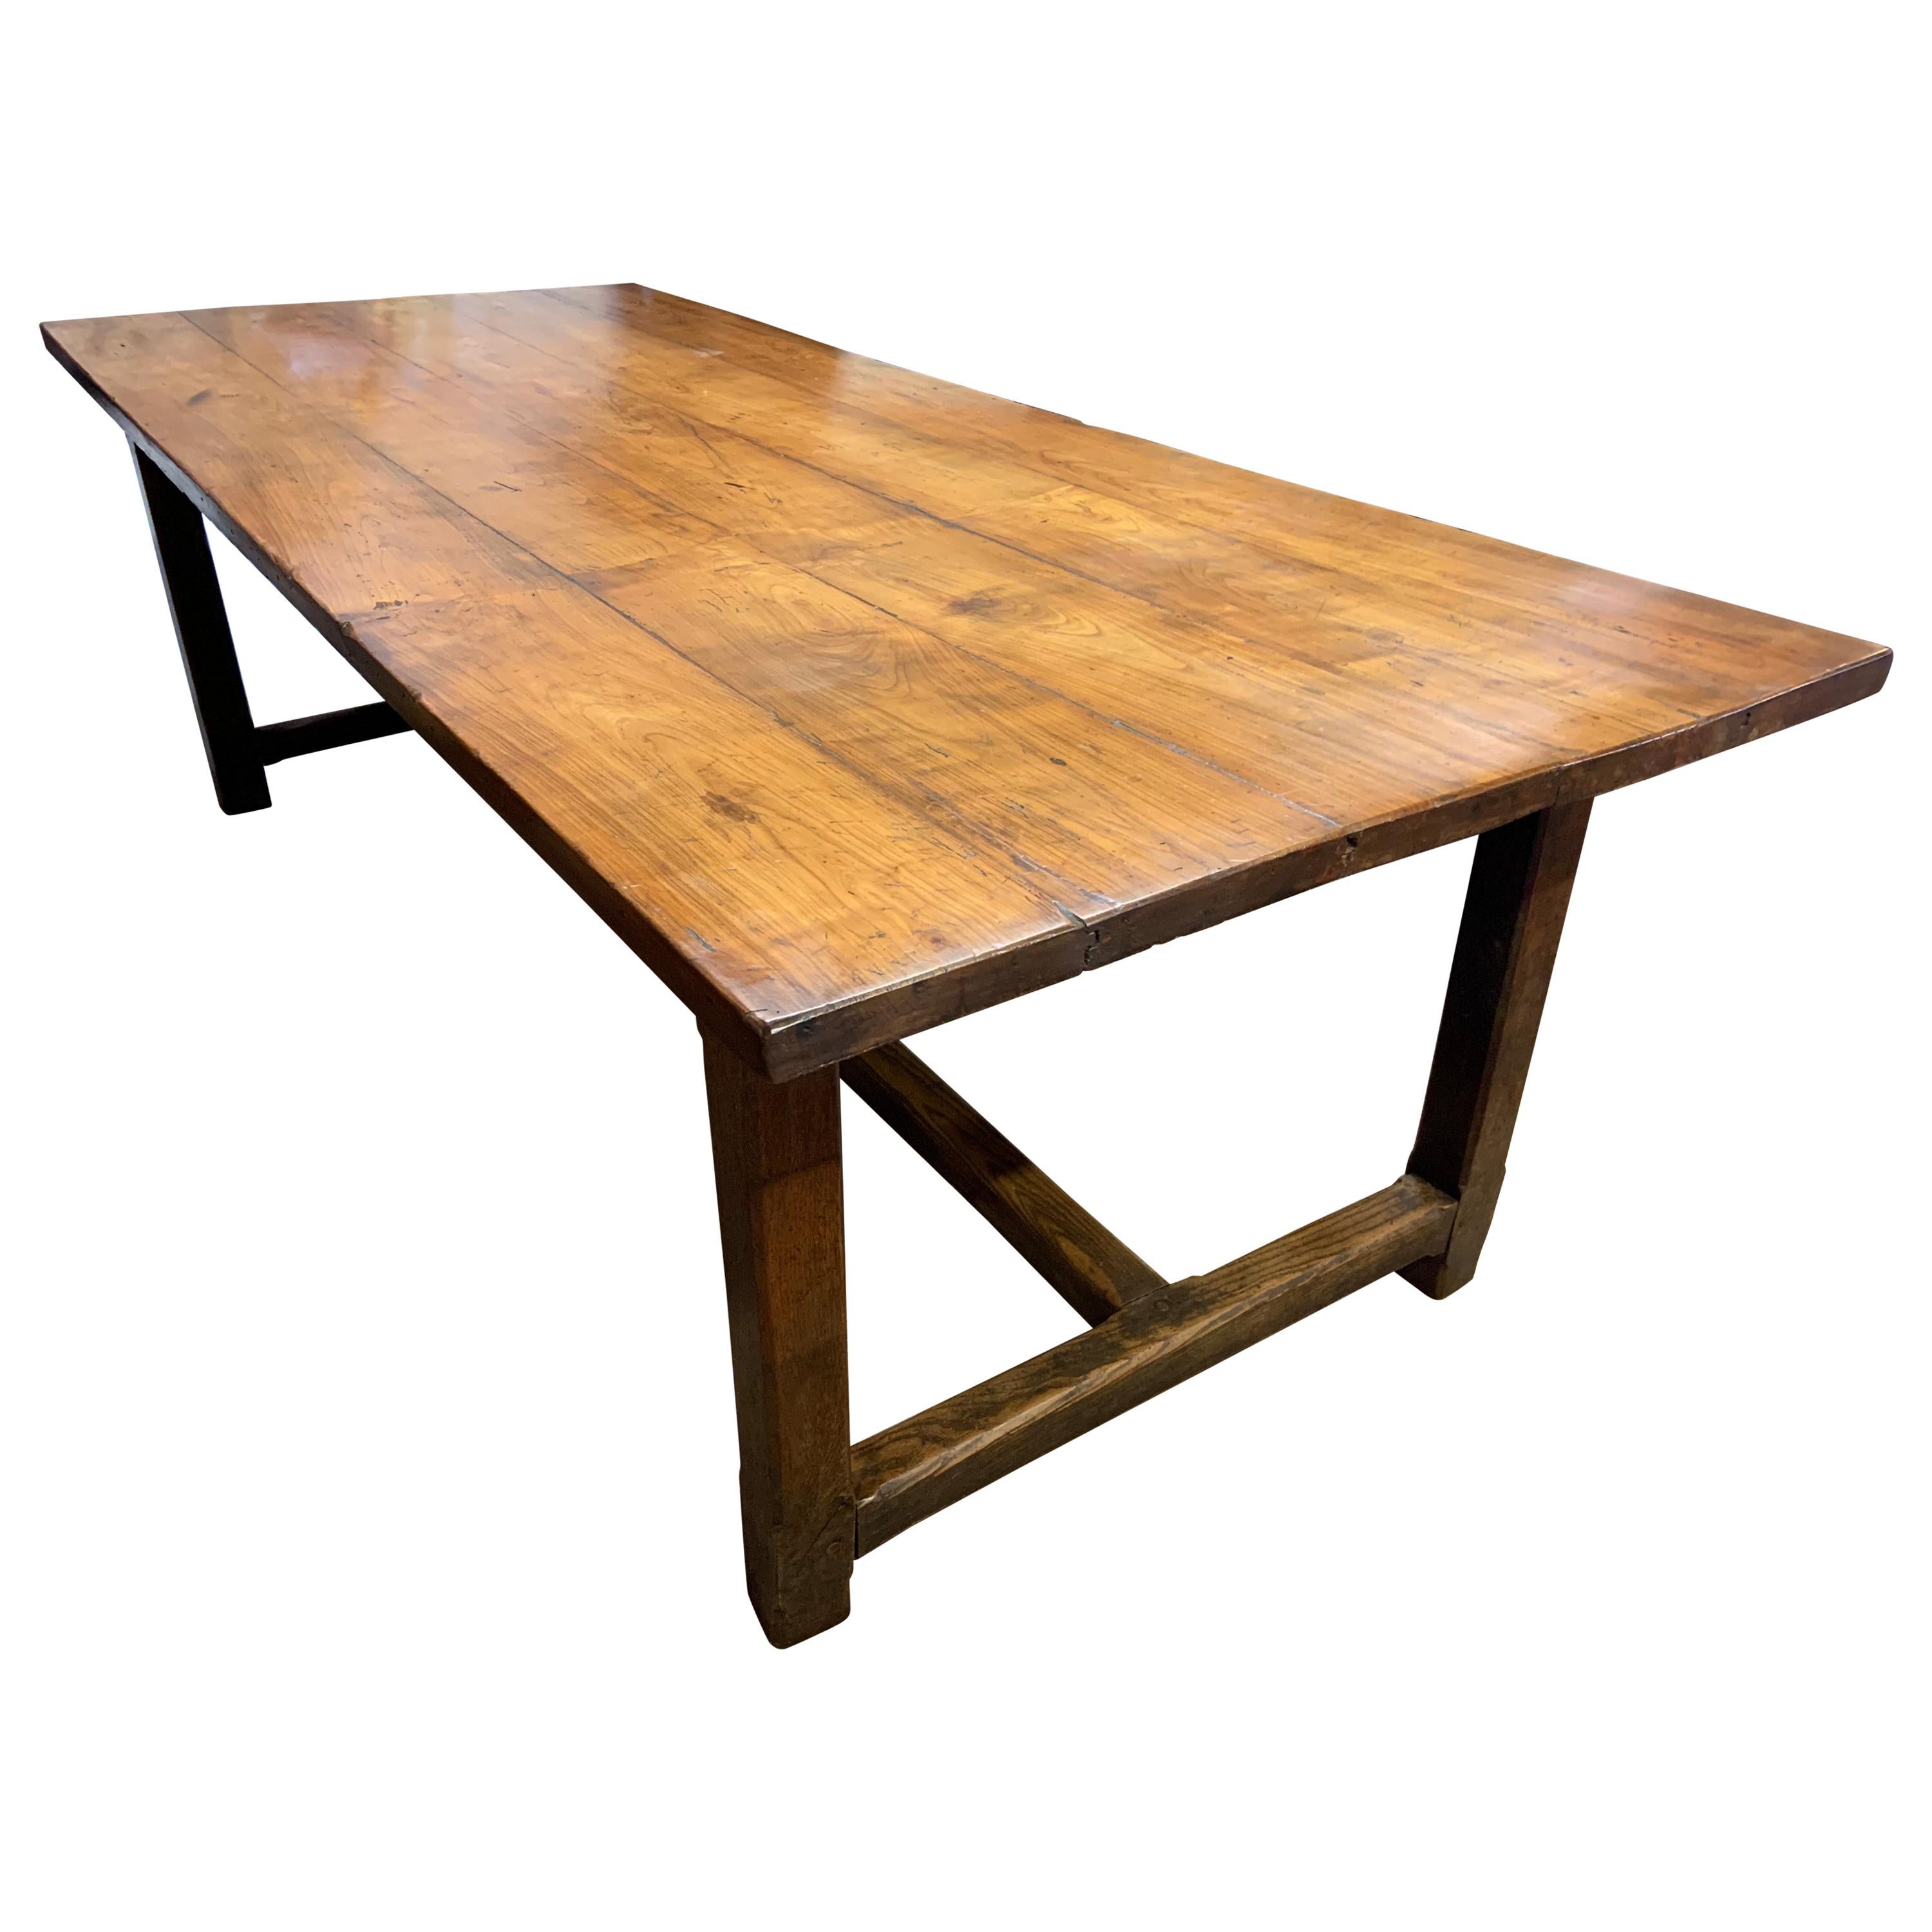 Early 19th Century Wide Cherry Farmhouse Table